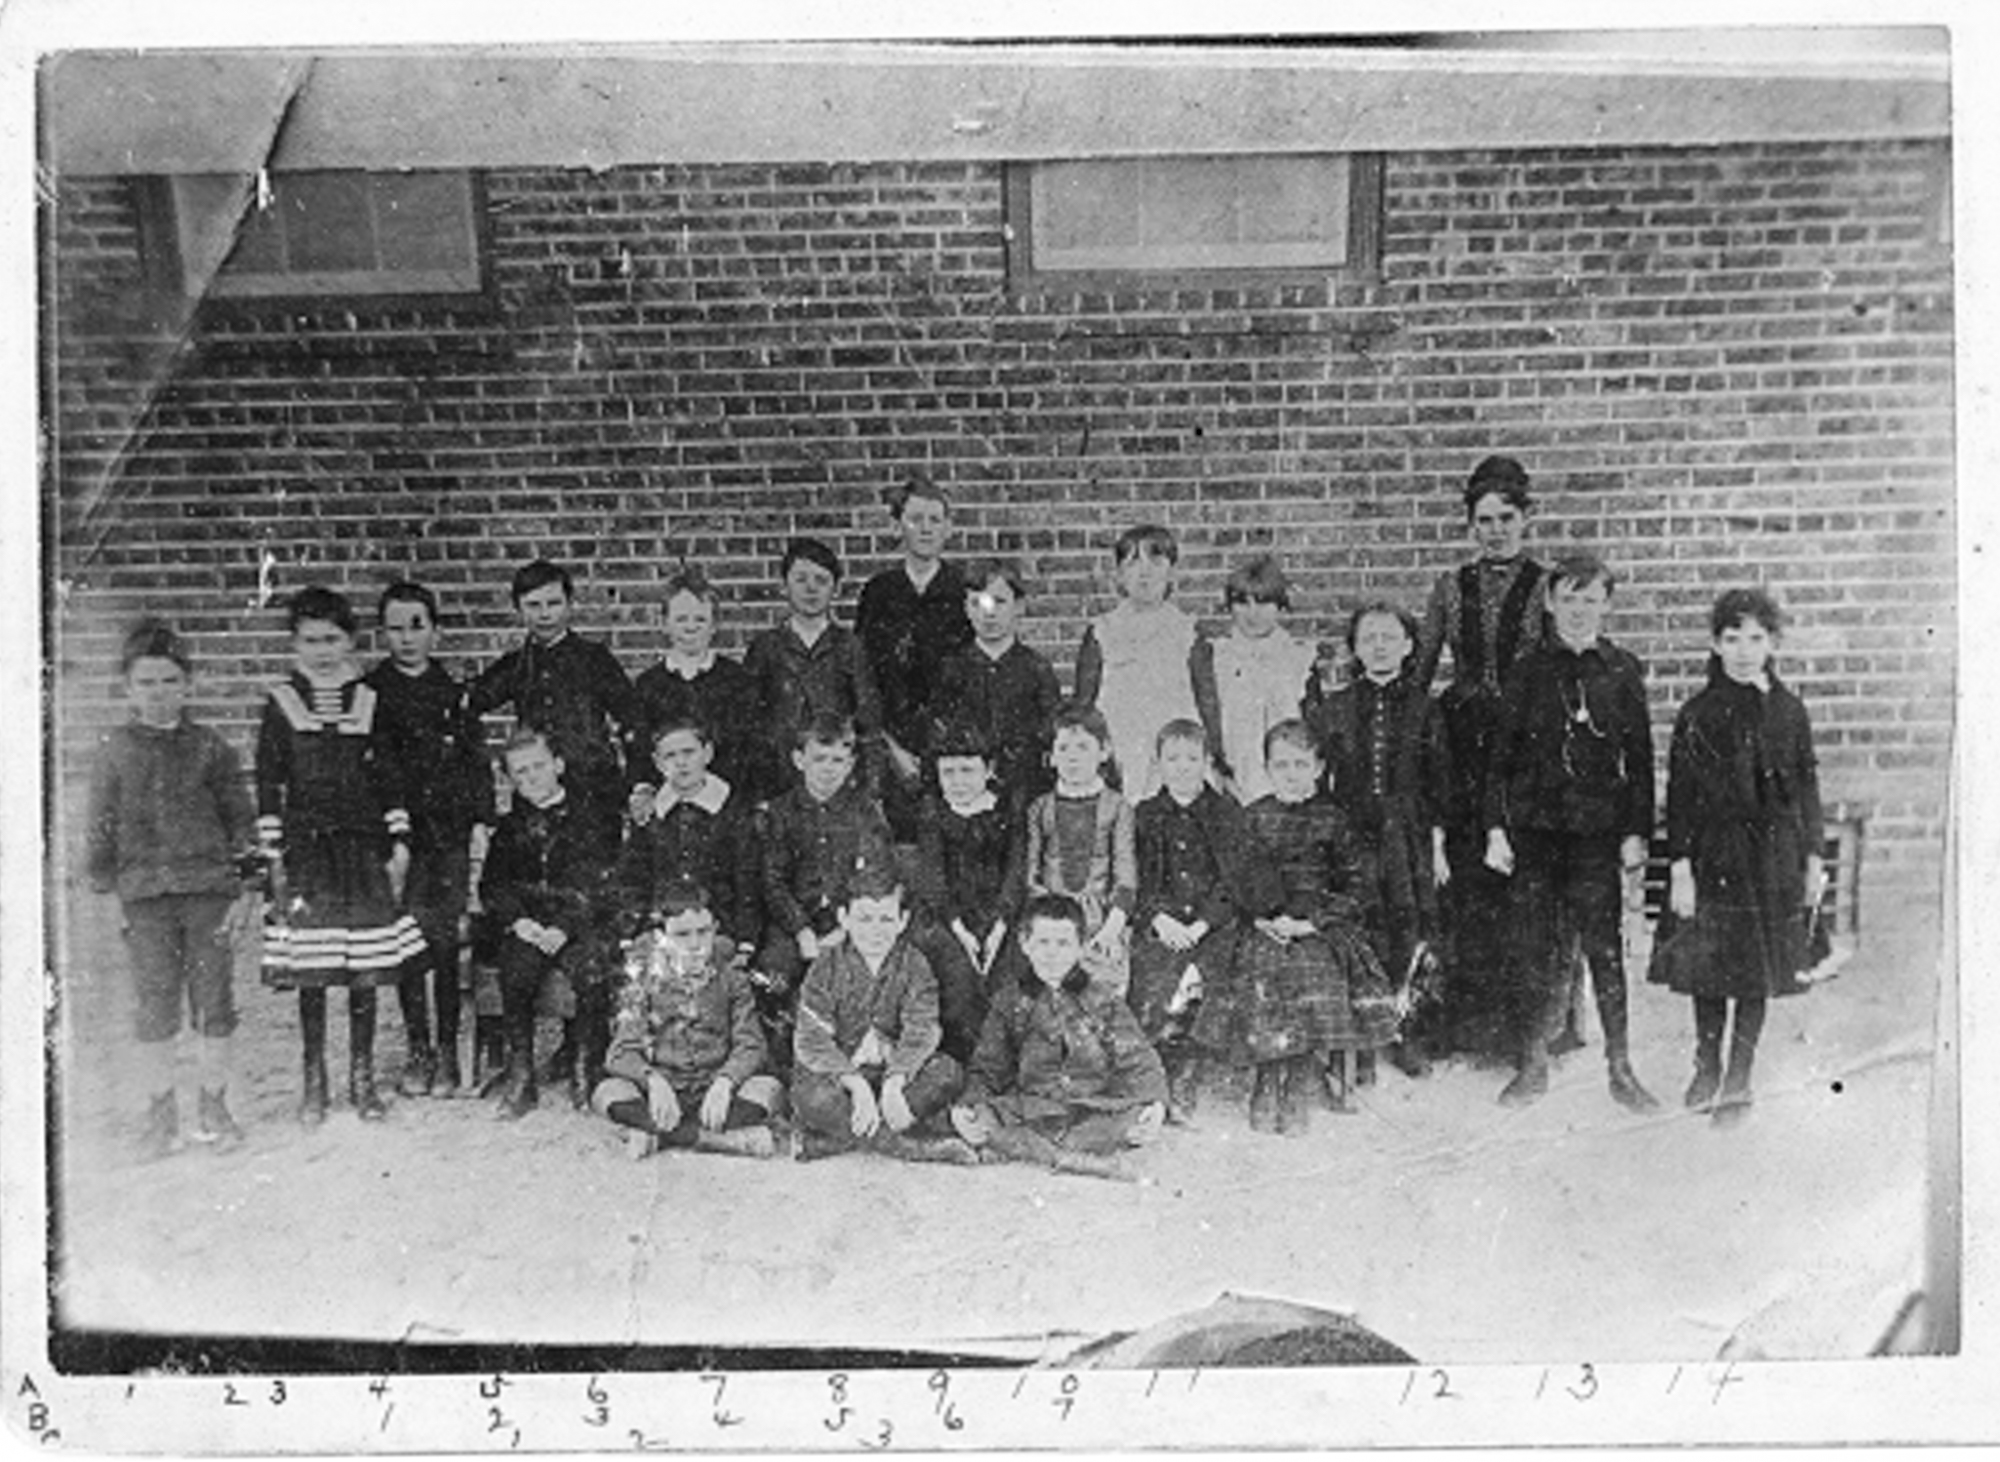 1886 SCHOOL IMAGE - RH GRADED SCHOOL / WITHERSPOON AND WHITE